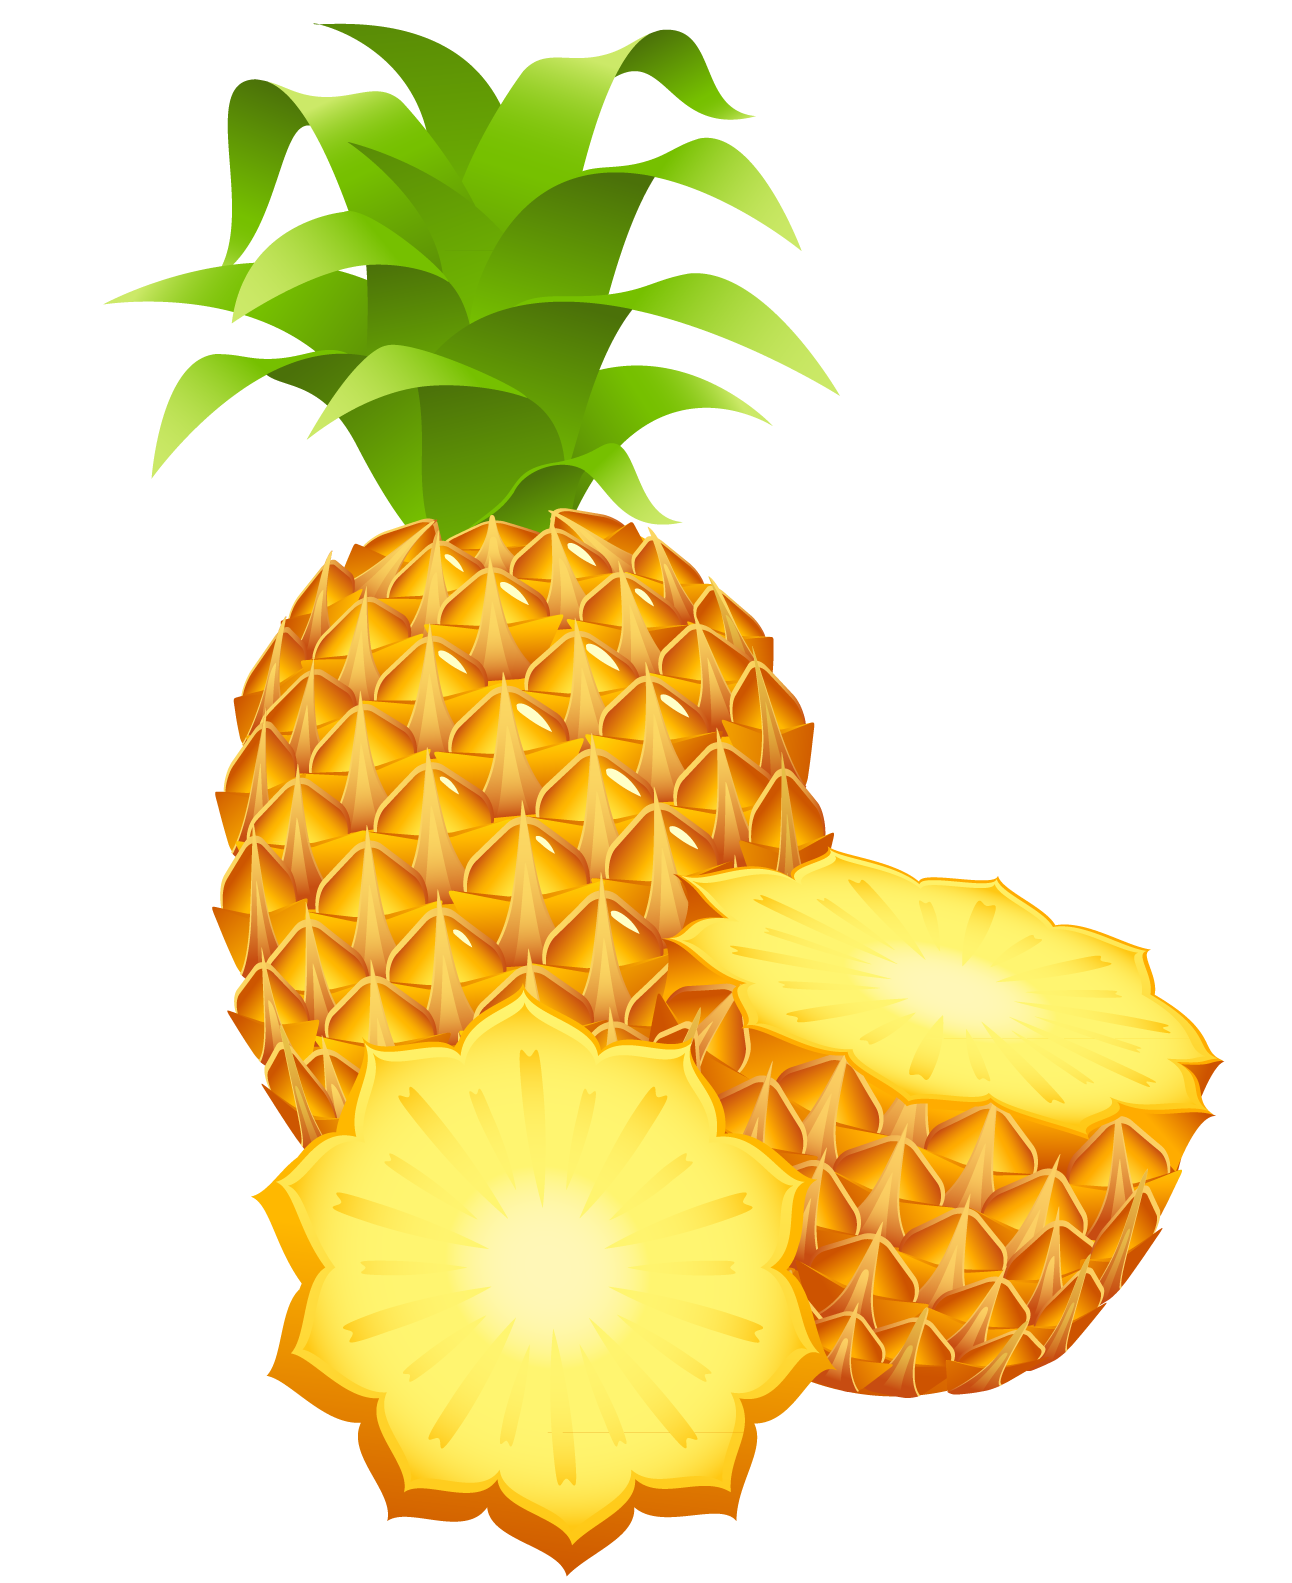 Pineapple images free pictures download cliparts